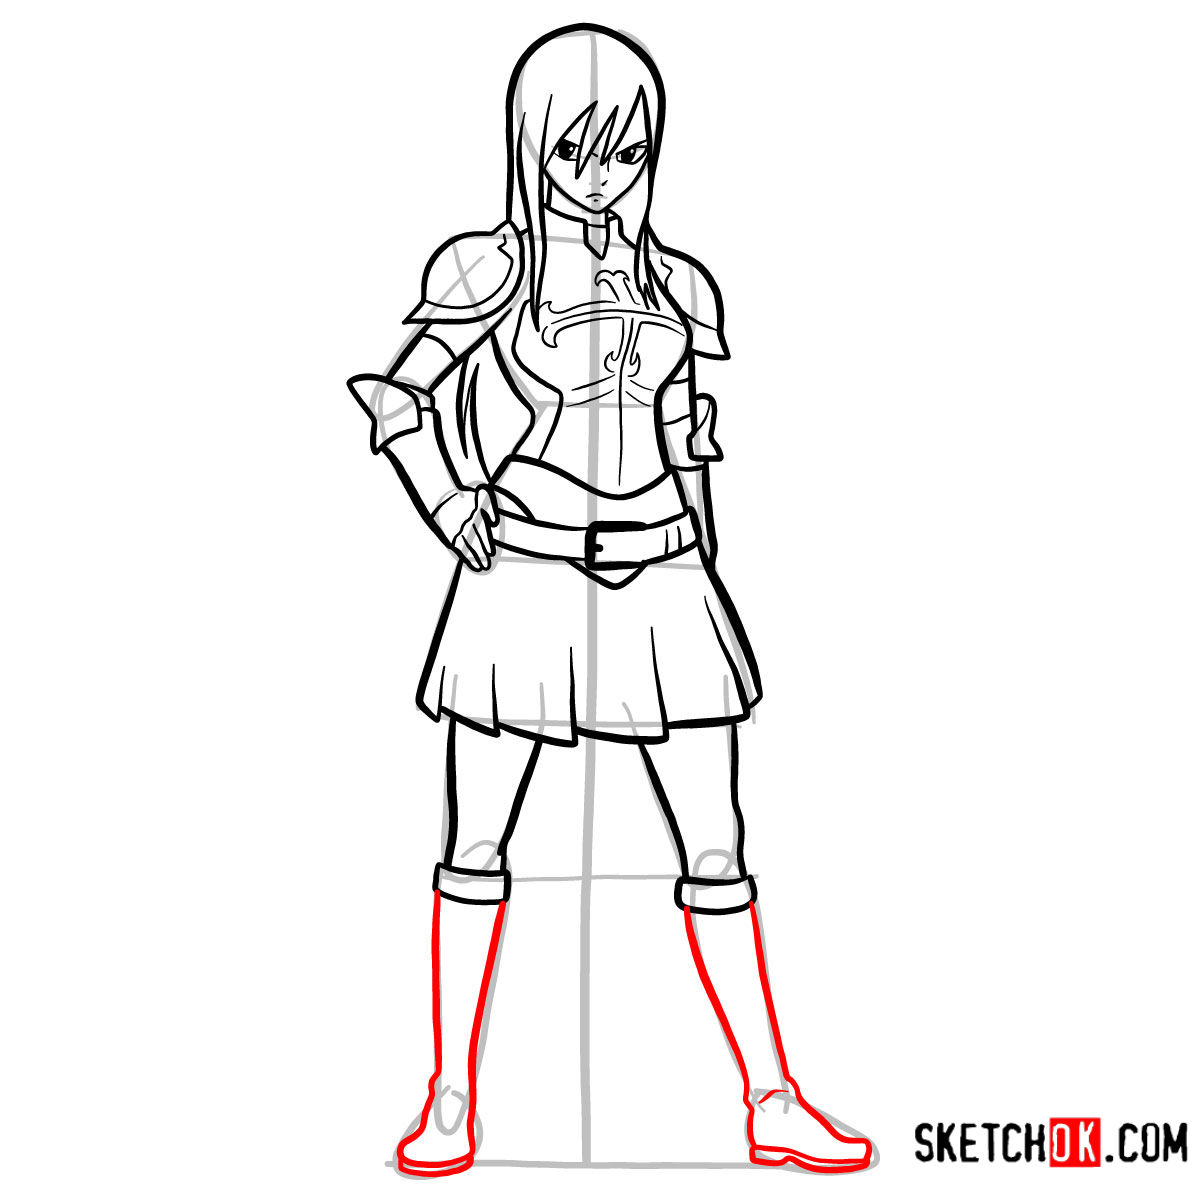 15 steps drawing tutorial of Erza Scarlet (fairy tail) - step 14